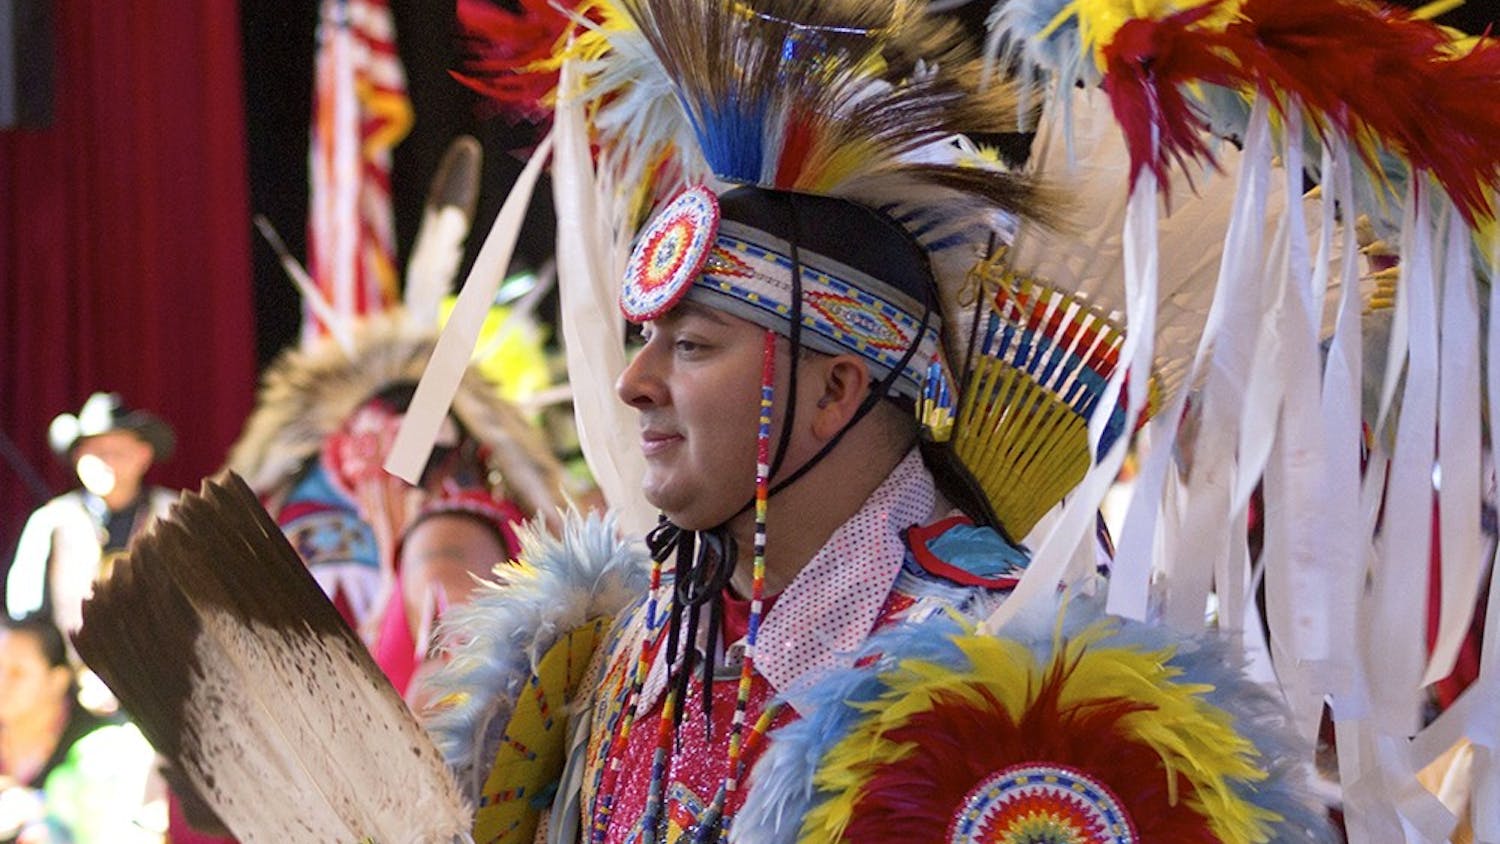 Darrell Hill, an invited dancer from Milwaukee, dances during Grand Entry at the Indiana University 4th Annual Traditional Powwow on Saturday in Alumni Hall.